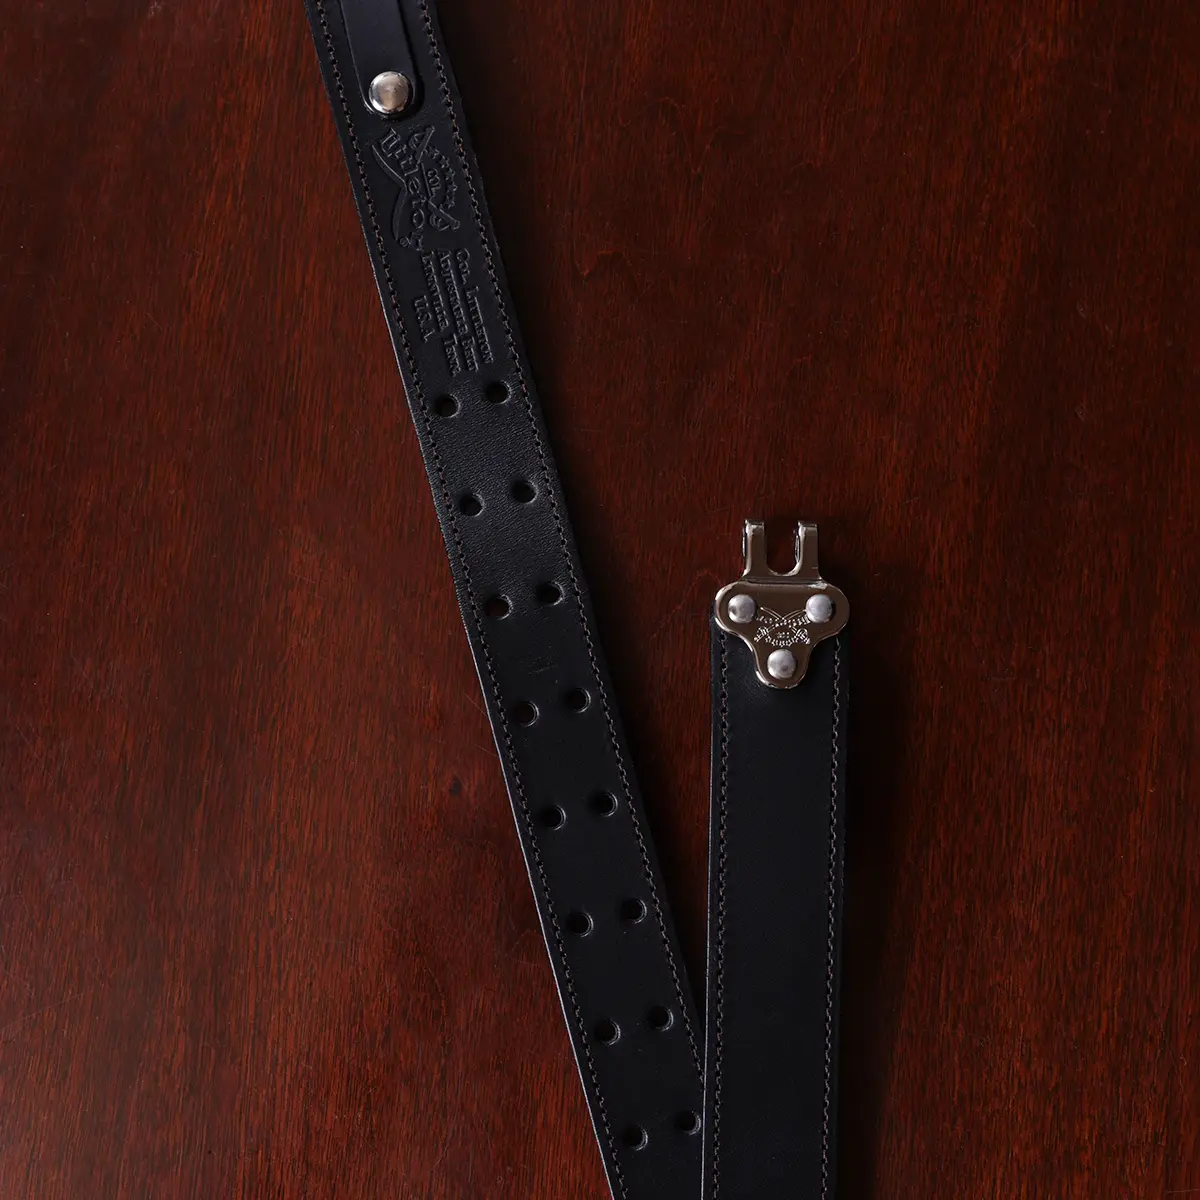 Belt Size Guide  Genuine Leather Guide - Women and Men's Belt